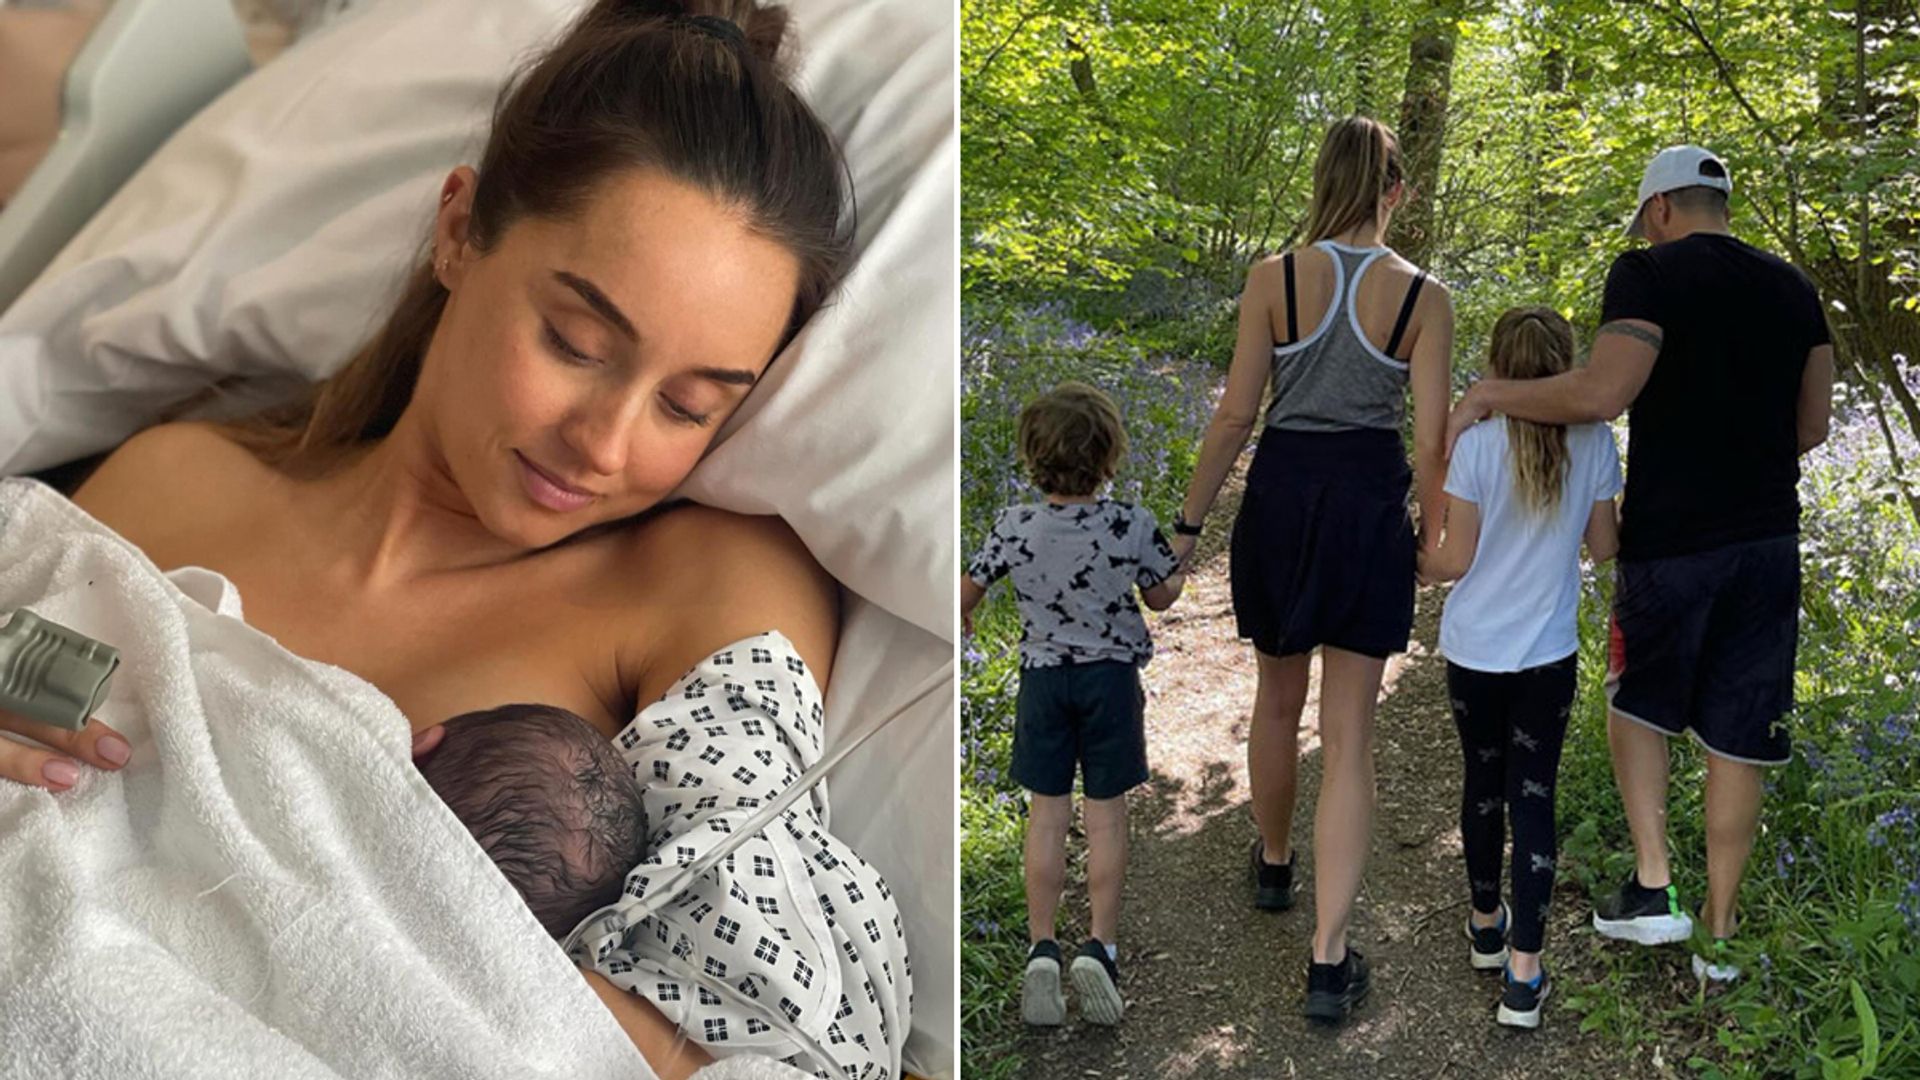 Emily Andre shares intimate family photo of baby Arabella with rarely-seen siblings